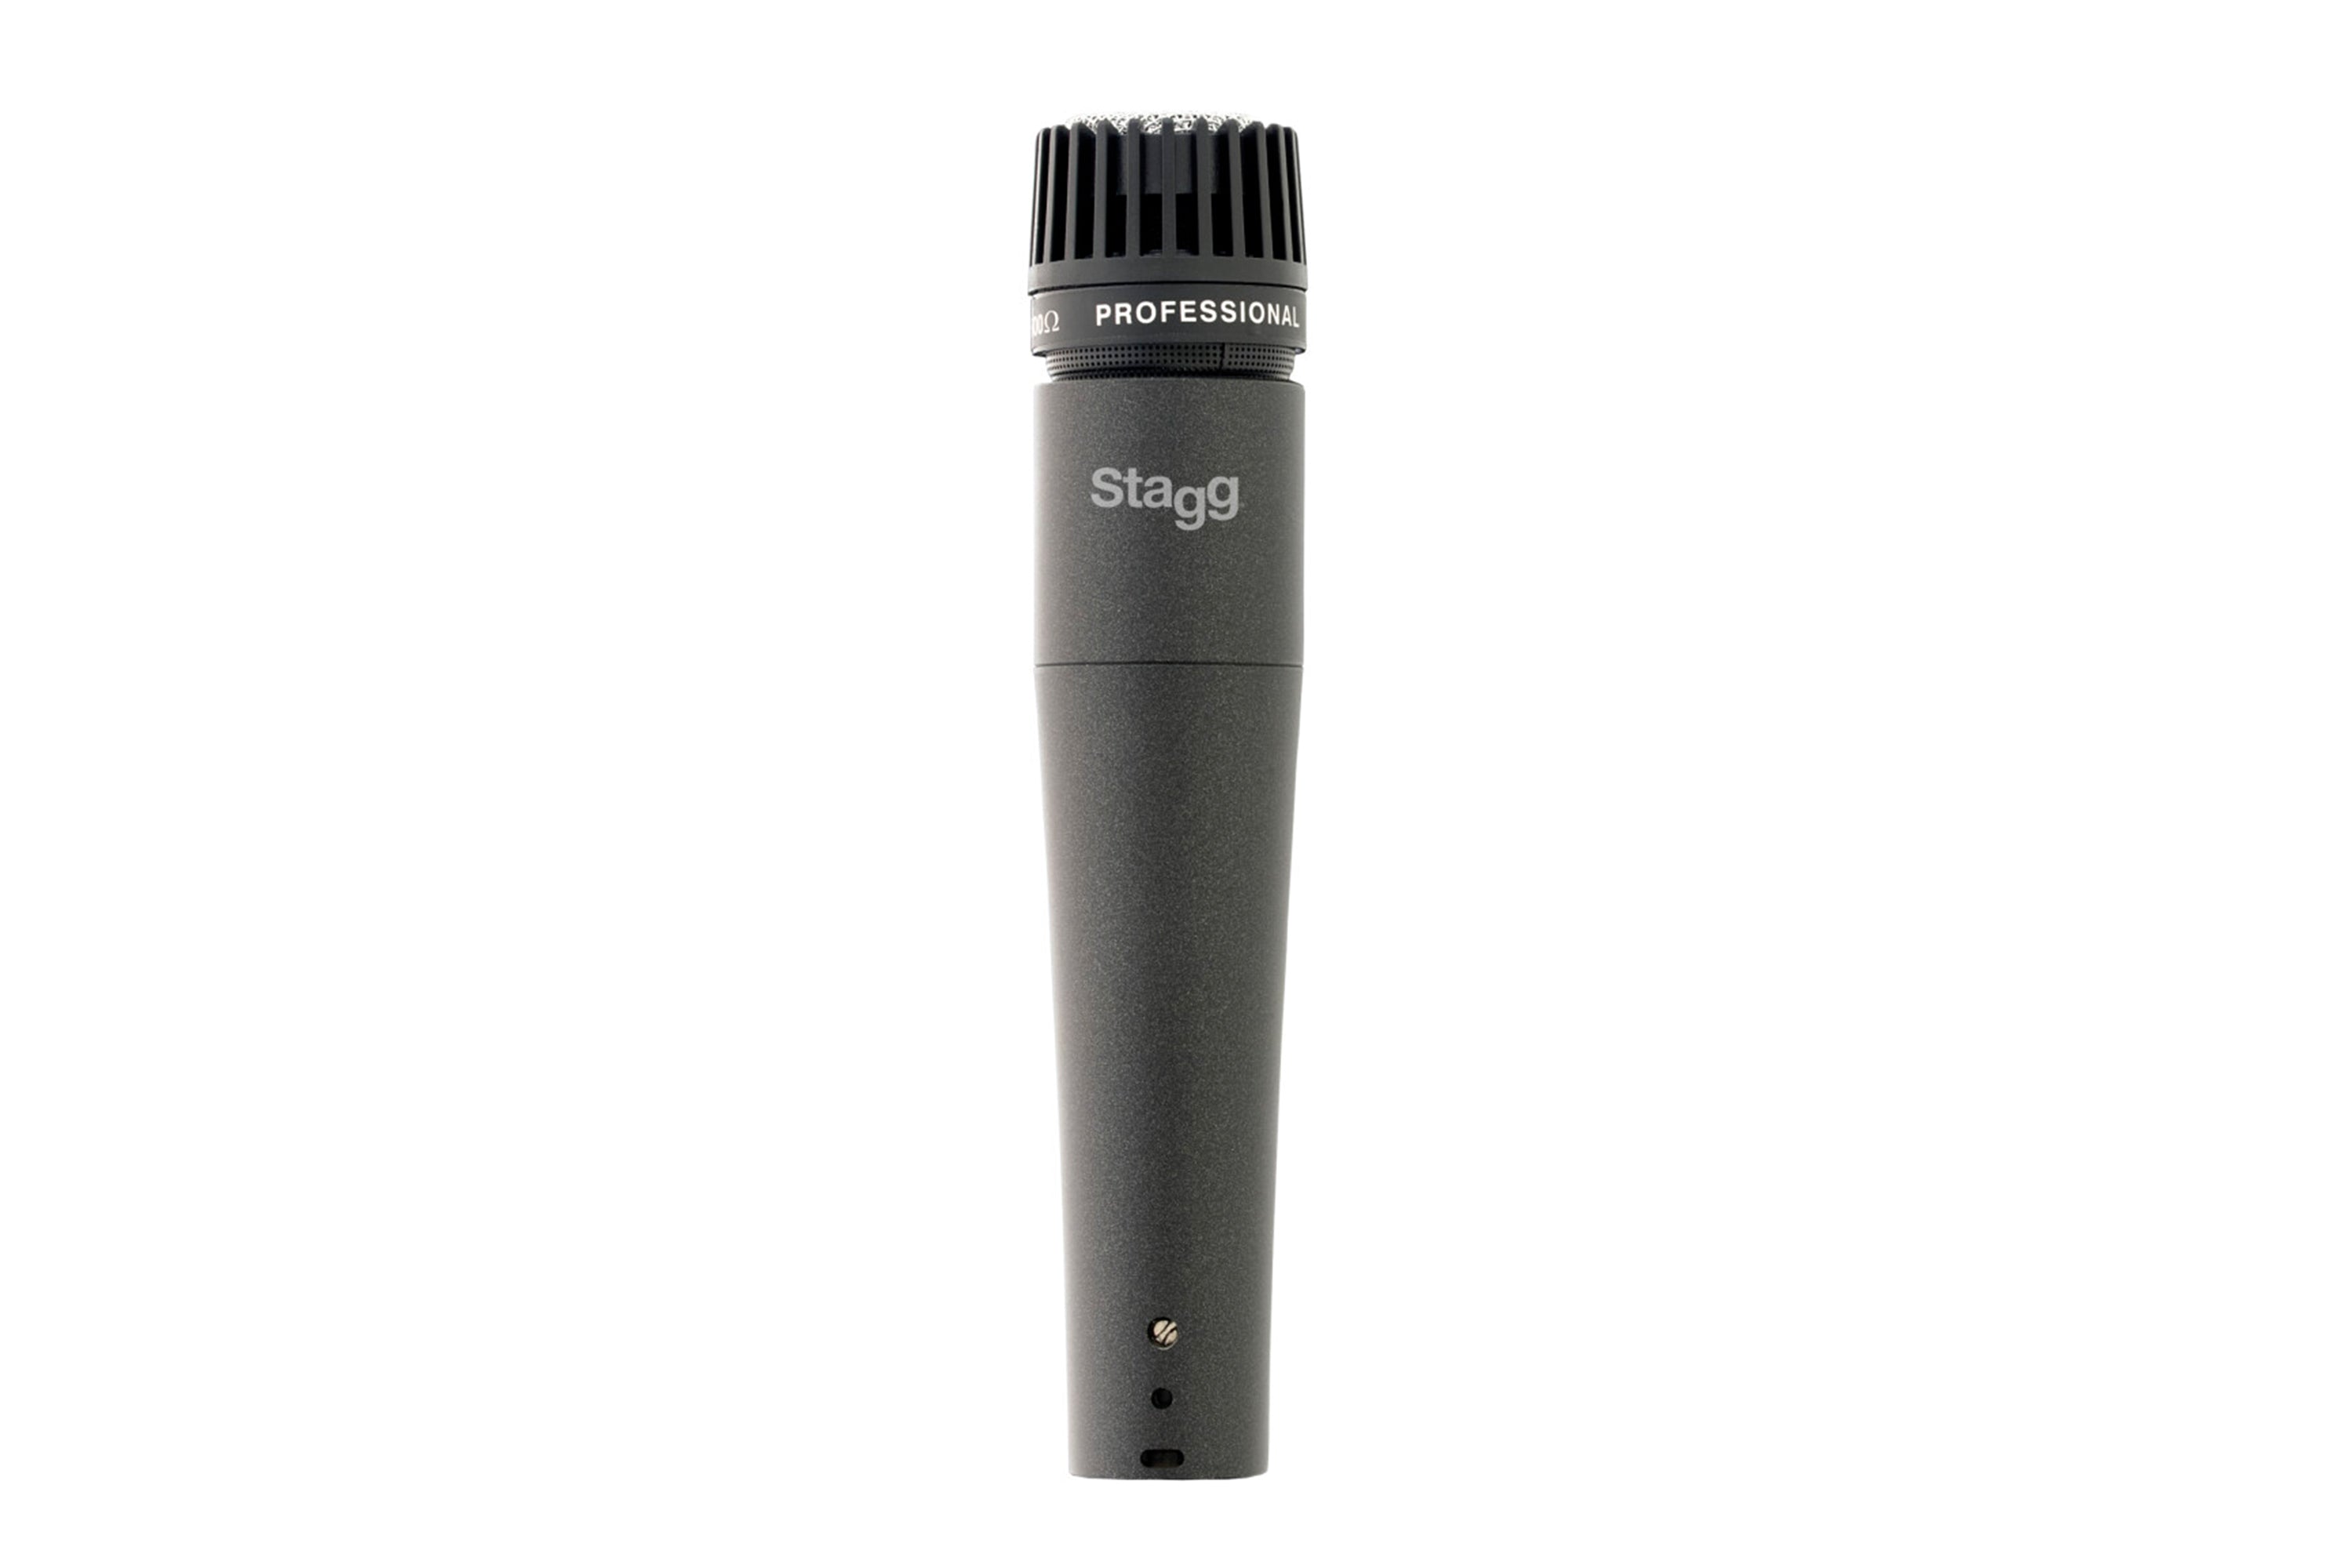 Stagg SDM70 Professional Microphone